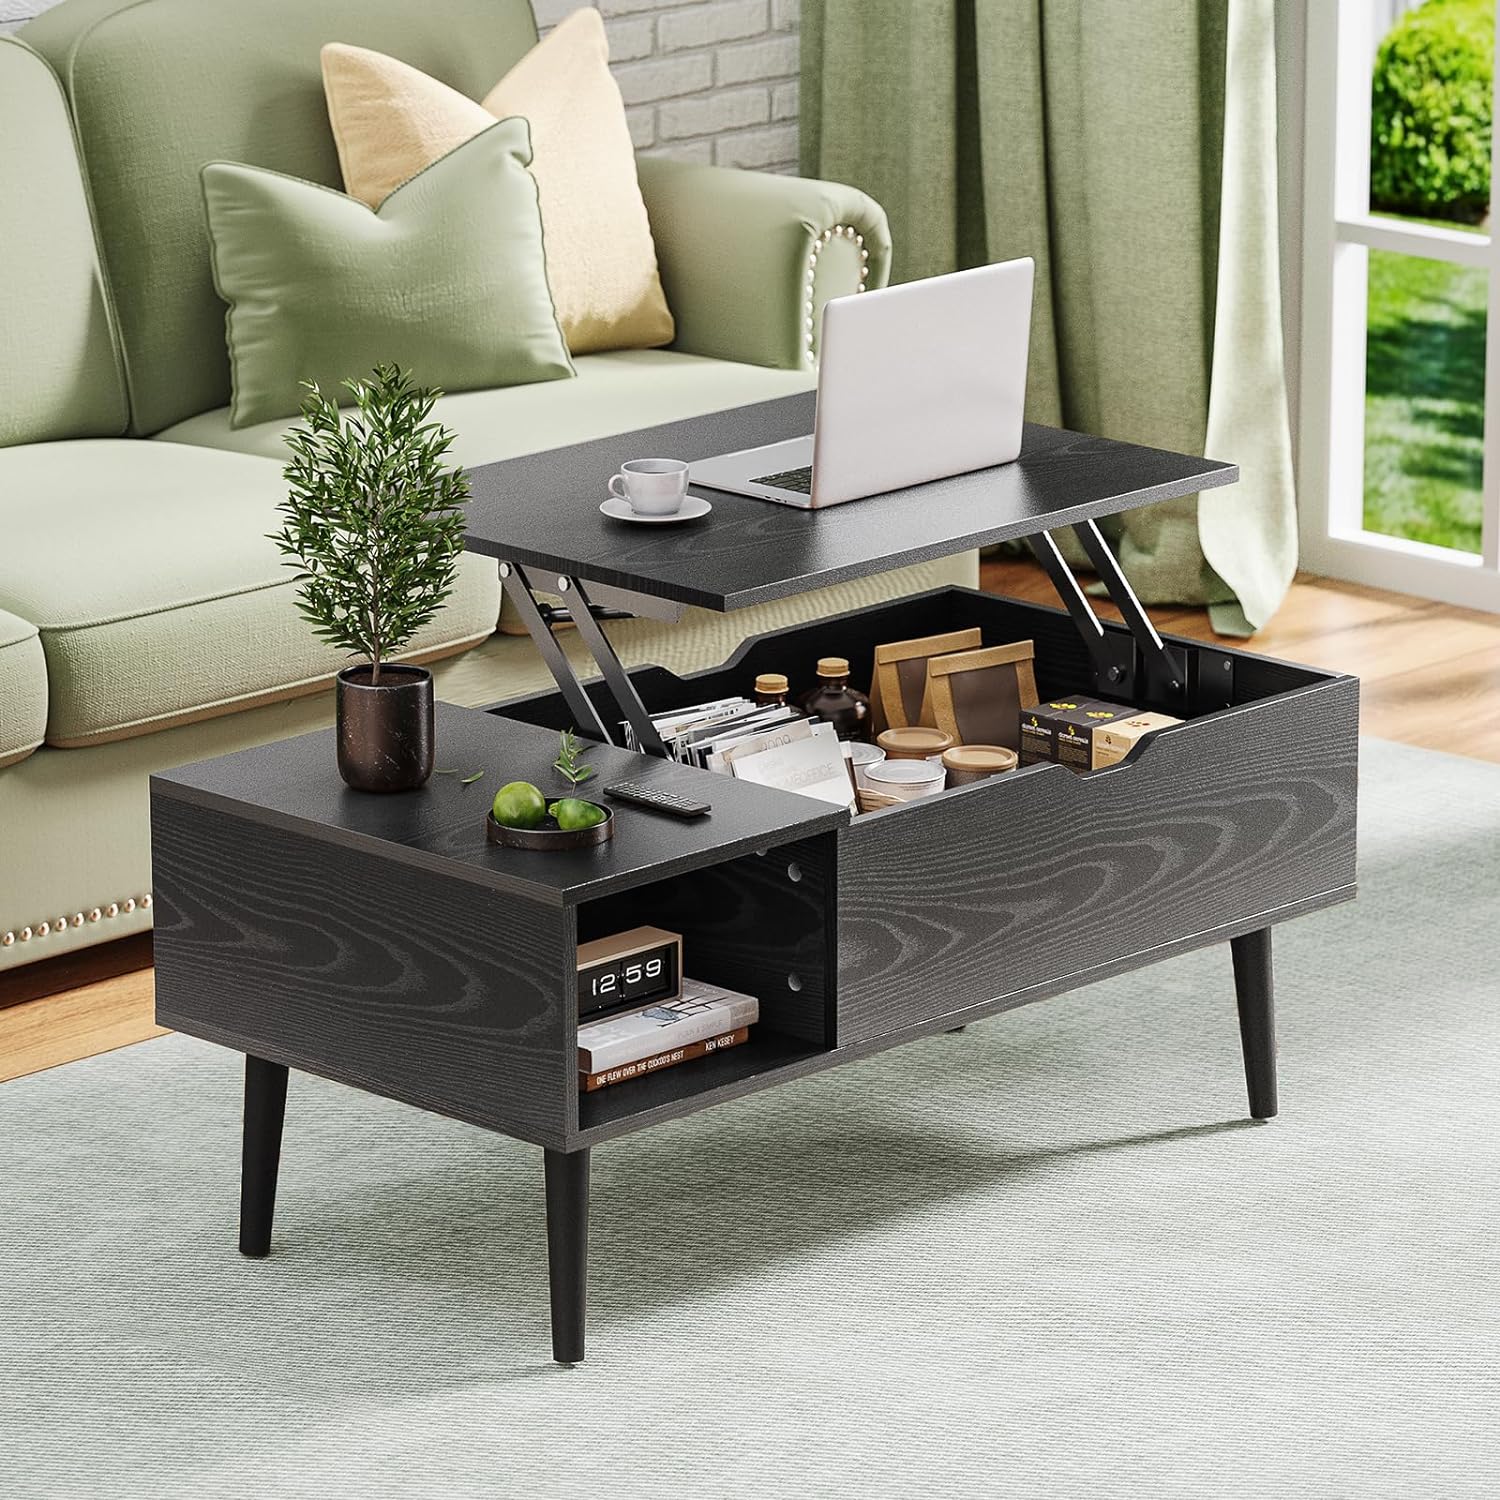 Small Coffee Table with Storage Shelf and Hidden Compartment, Modern Wood Lift Top Coffee Table for Living Room, Office, Reception Room